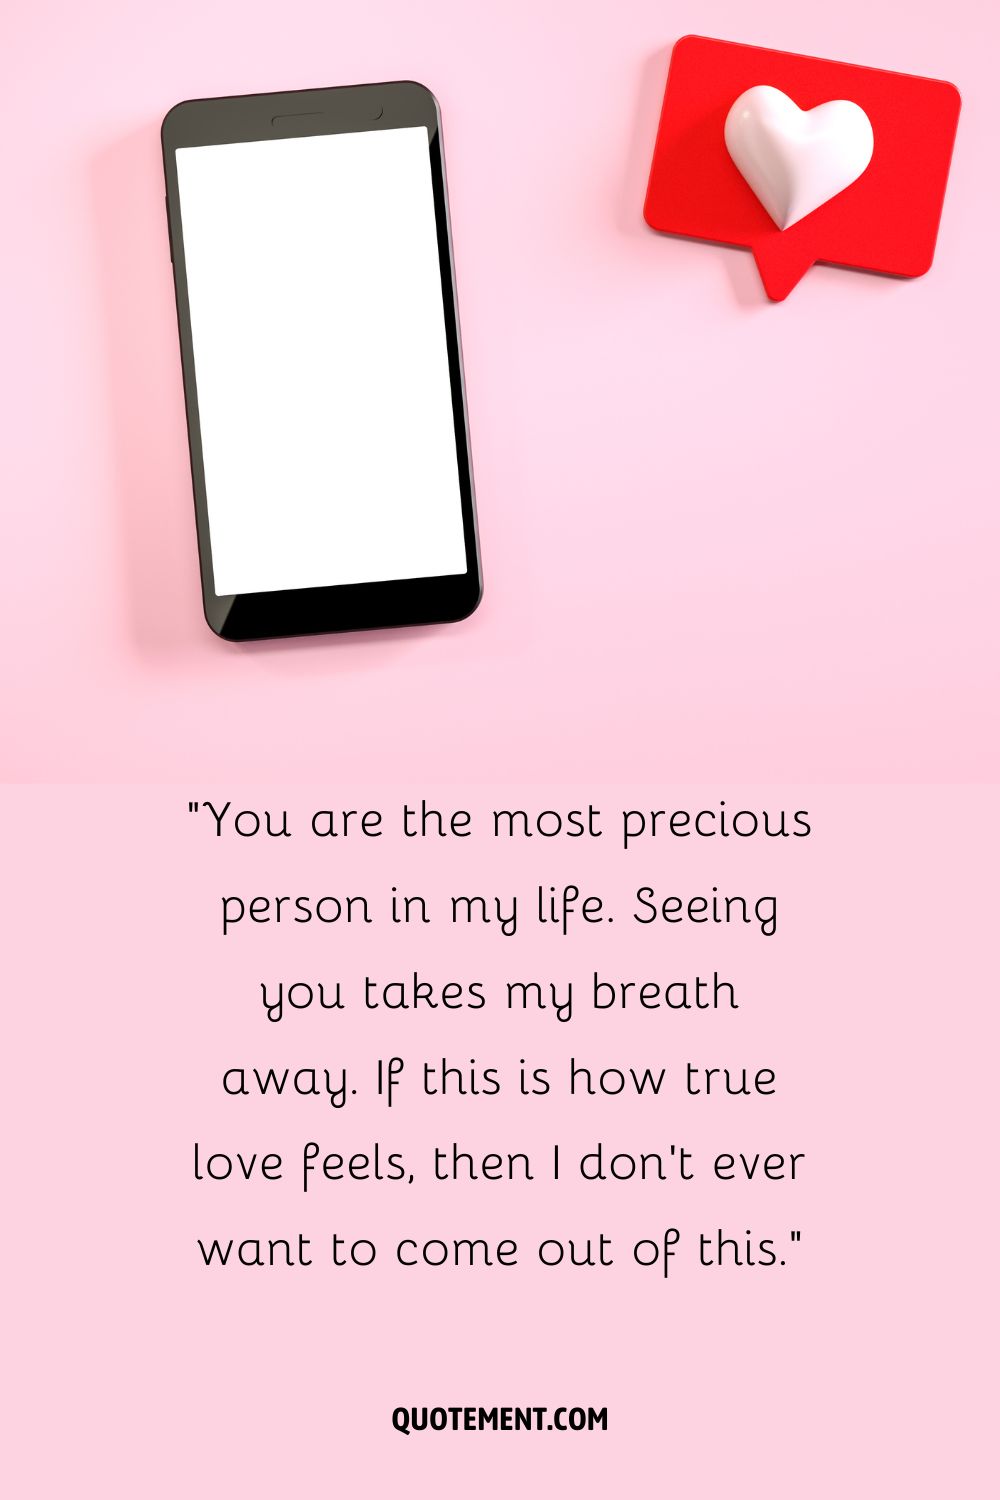 A phone with a white screen and a red speech bubble with a white heart next to it
